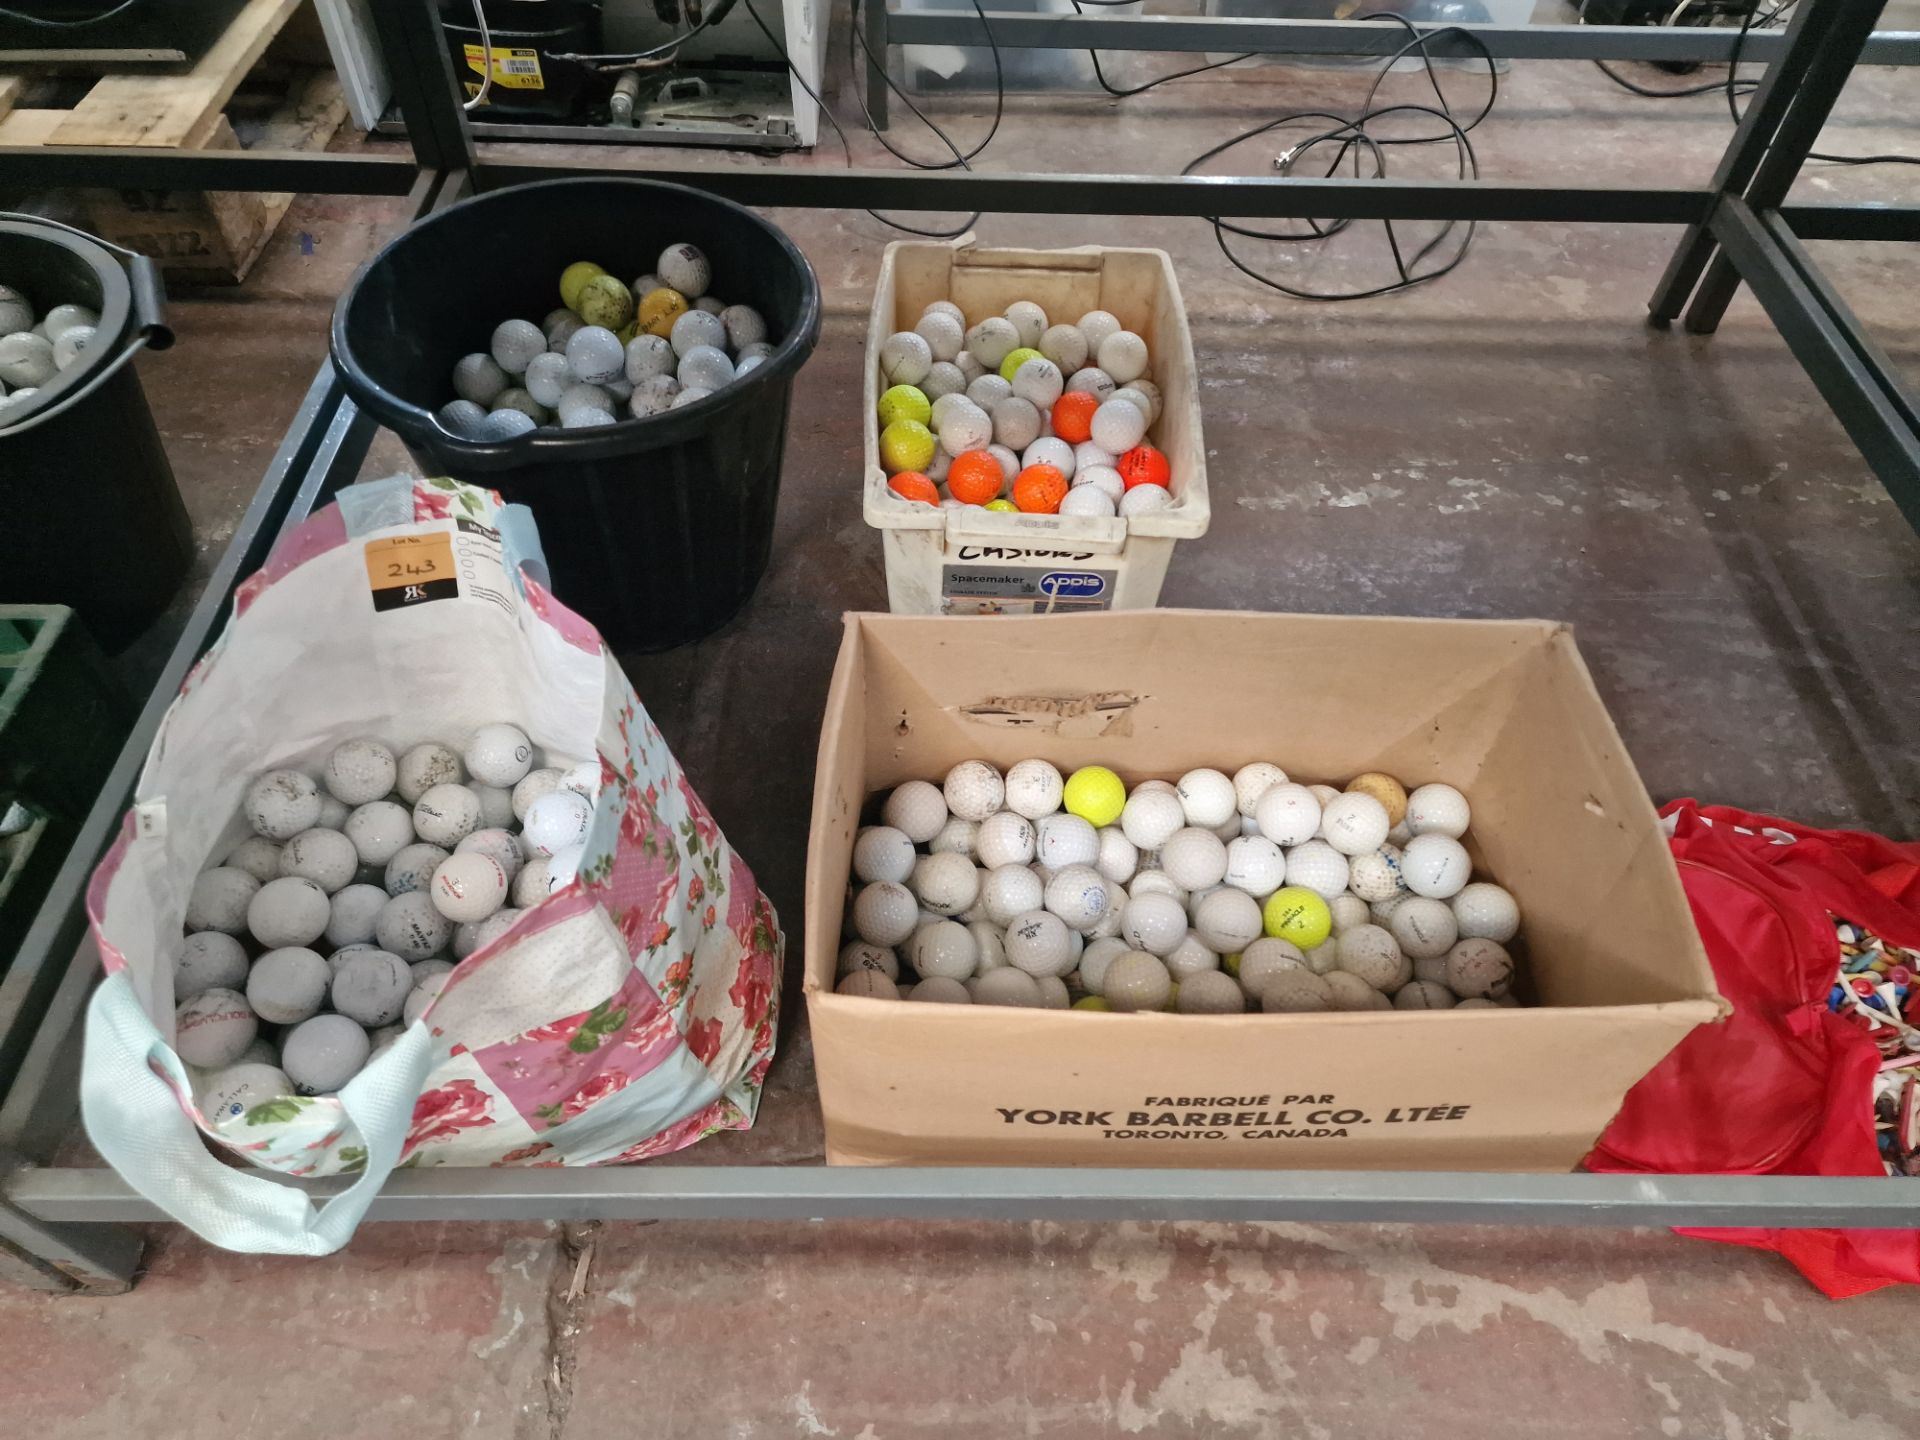 Large quantity of golf balls and tees - 4 boxes of similar and their contents plus 1 bag and content